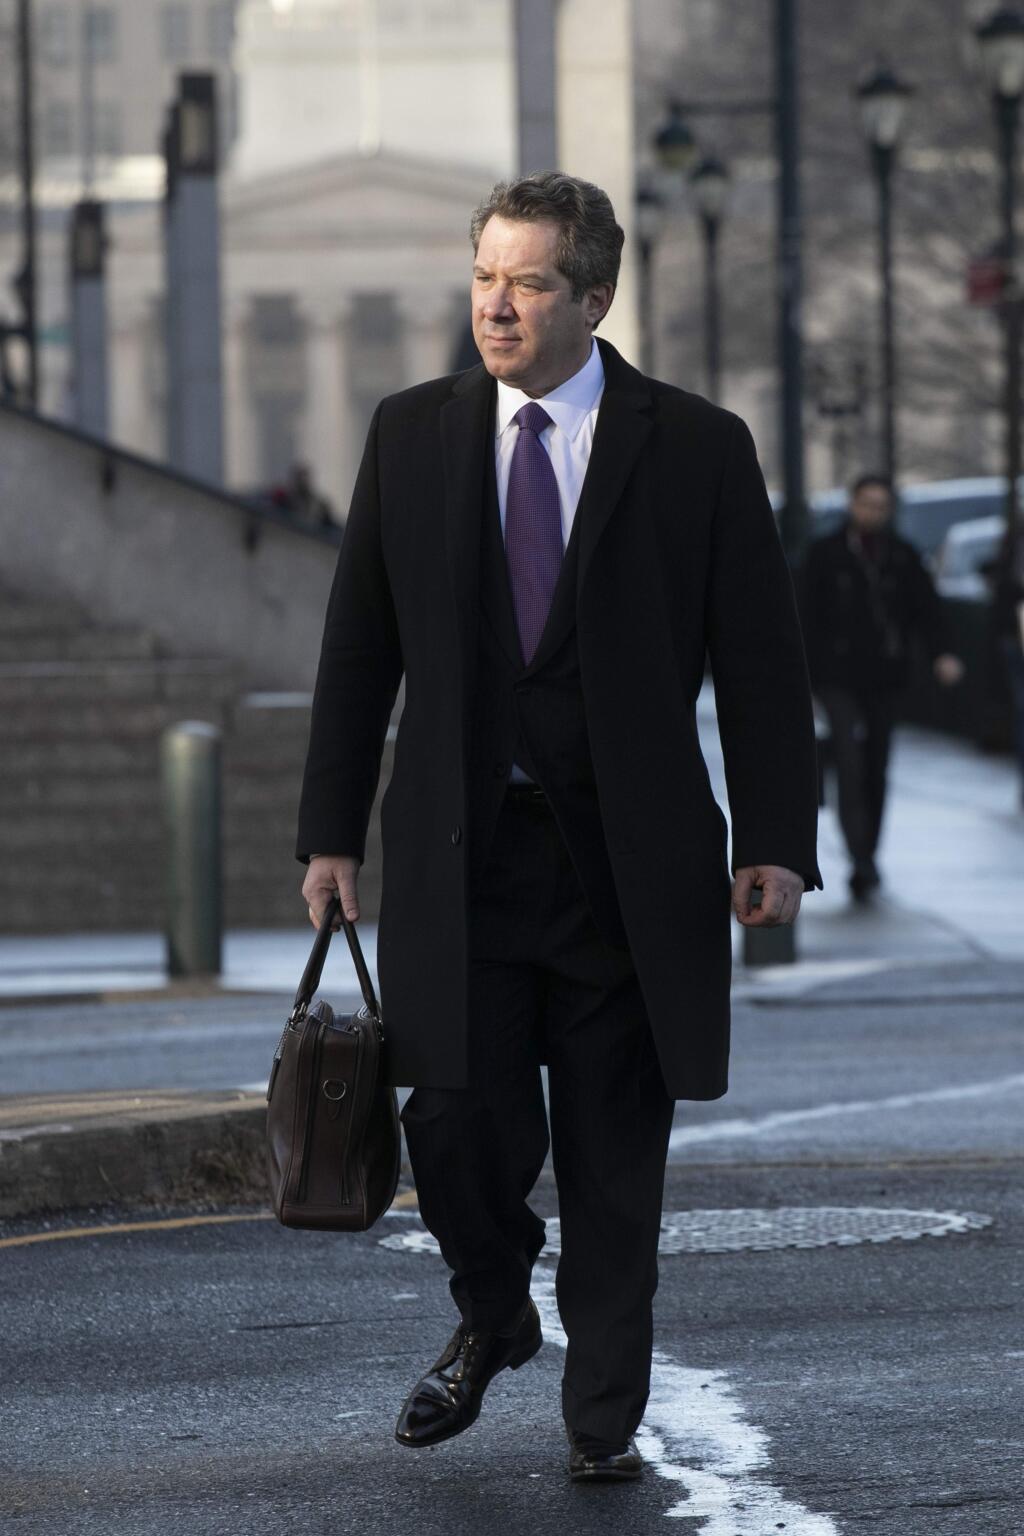 Jeffrey Lichtman, a defense attorney for Joaquin 'El Chapo' Guzman, arrives at federal court, Monday, Feb. 4, 2019 in New York. A jury is due to begin deliberations Monday at the U.S. trial of the infamous Mexican drug lord Joaquin 'El Chapo' Guzman. (AP Photo/Mark Lennihan)